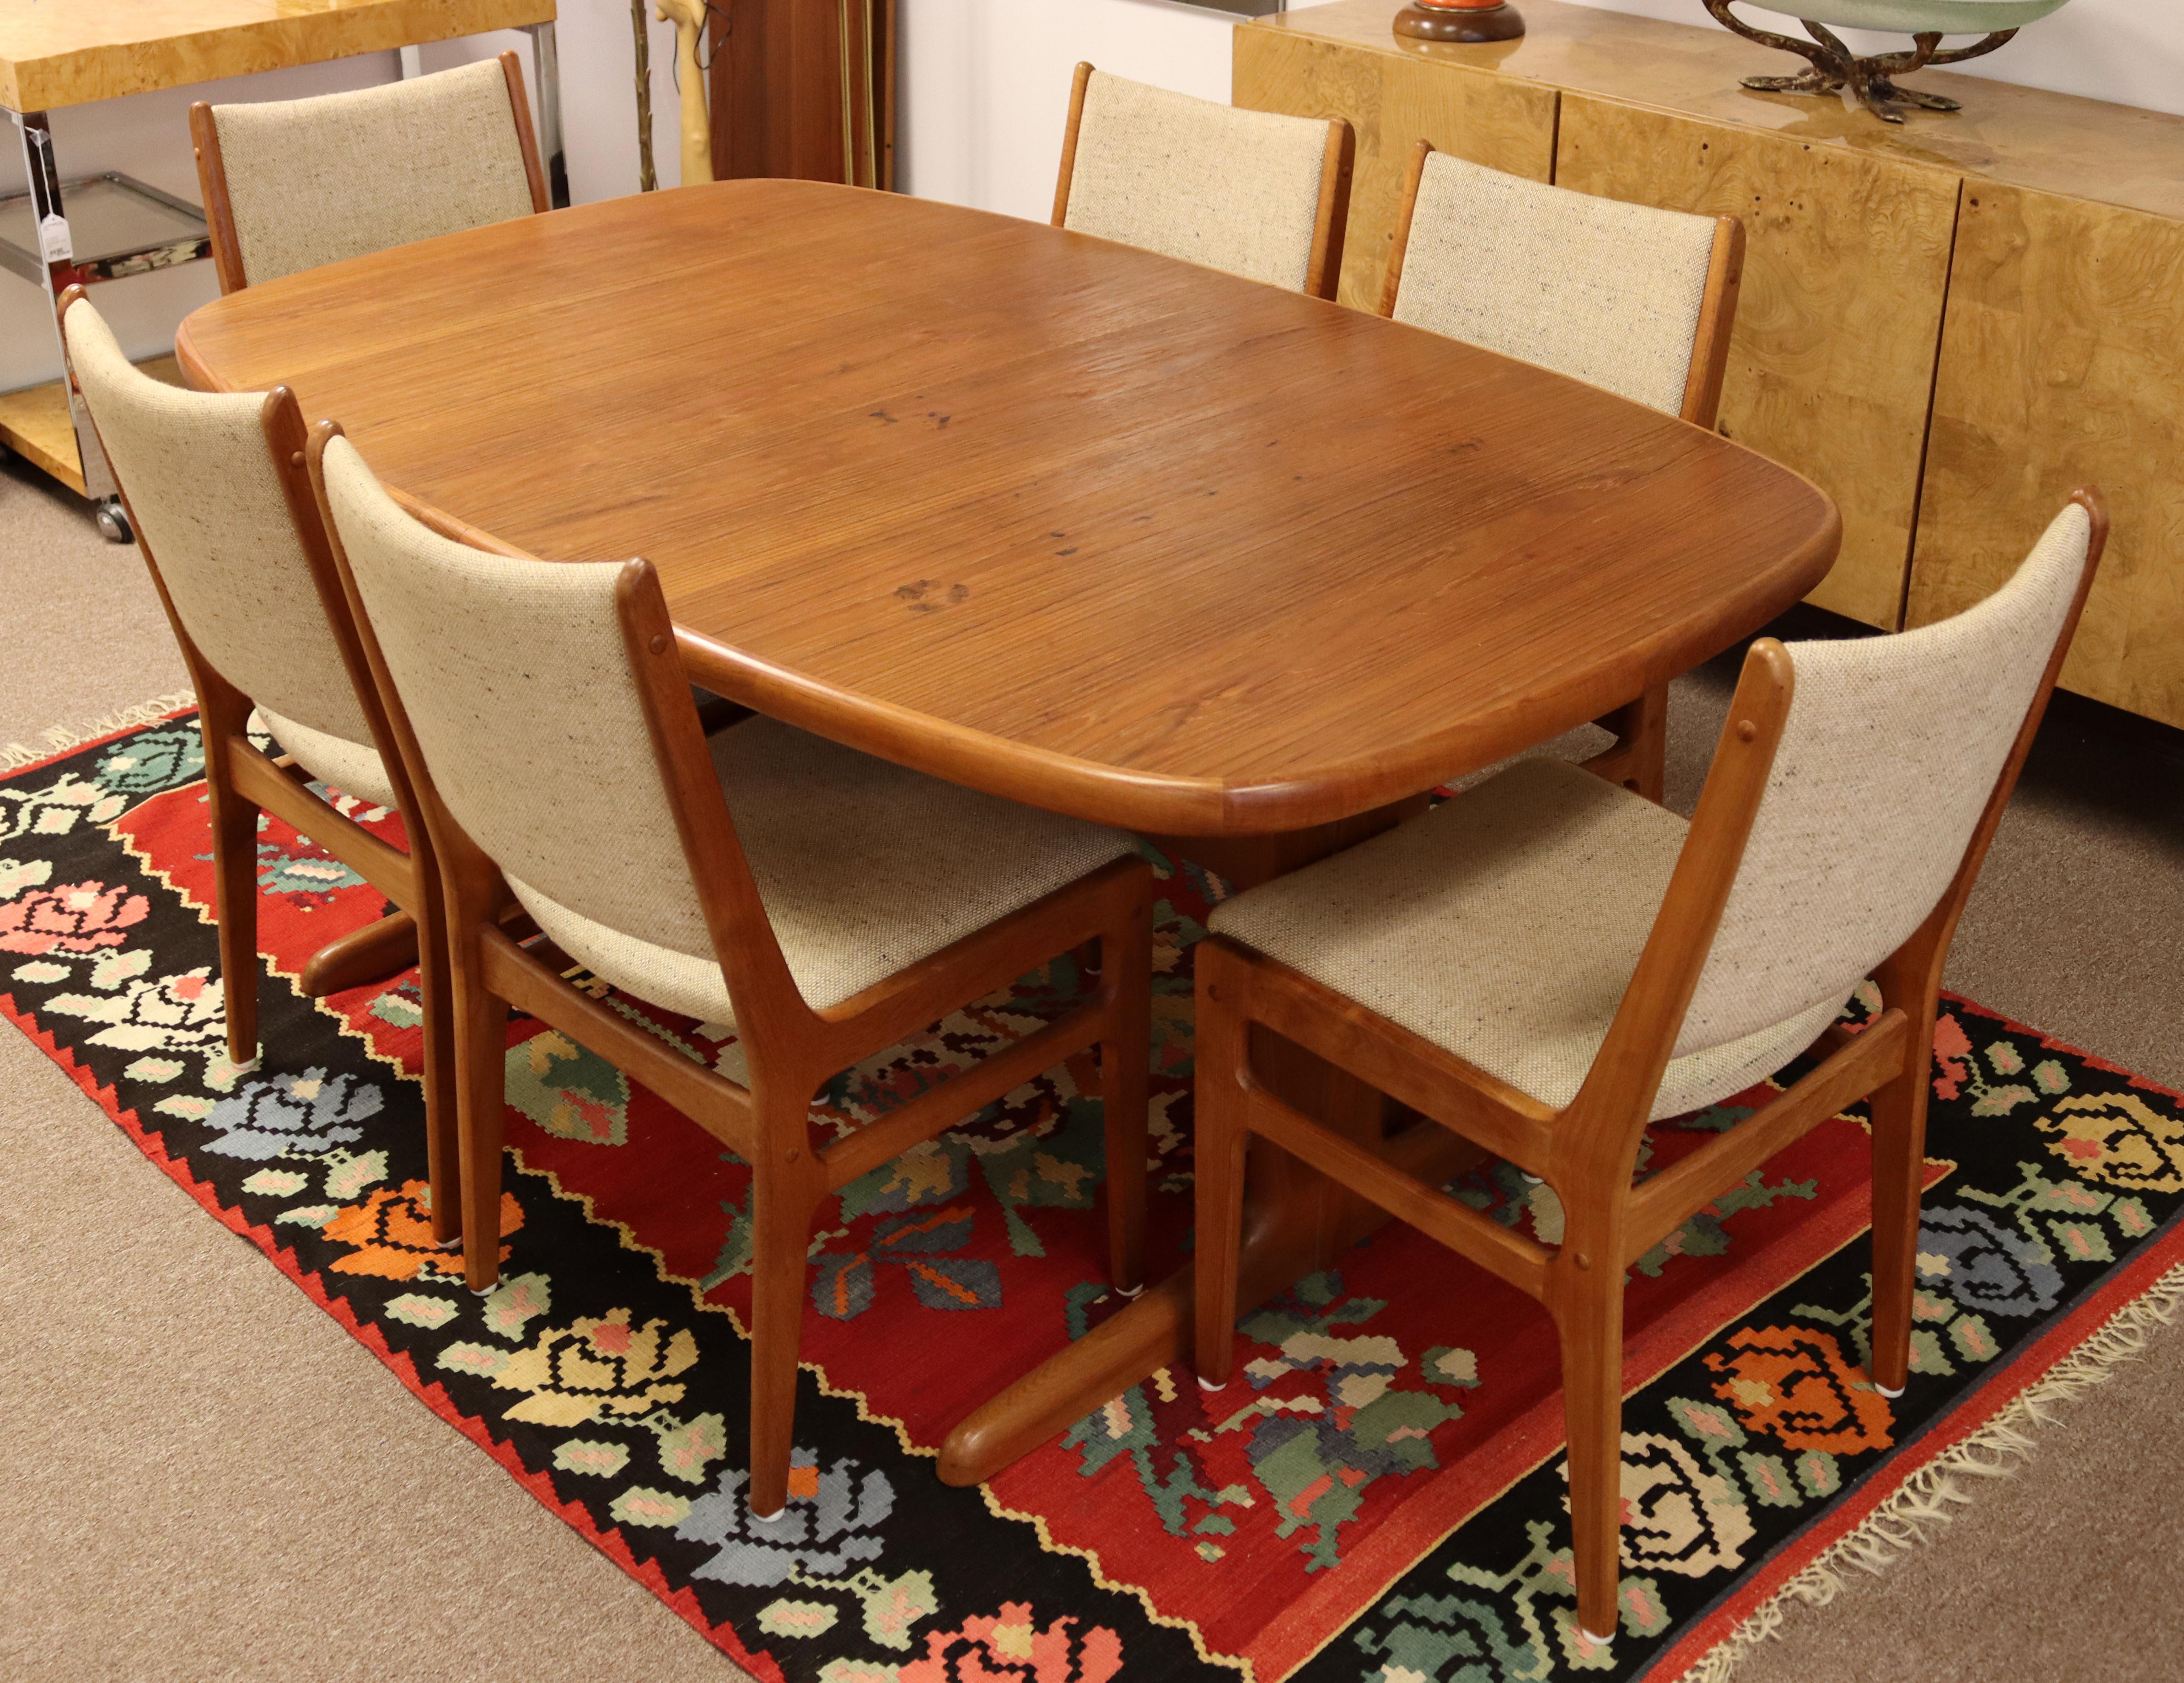 For your consideration is a stupendous, teak dining set, including six side chairs and a table with two leaves, by D-Scan, made in Singapore, circa the 1960s. In very good vintage condition. The dimensions of the table are 65